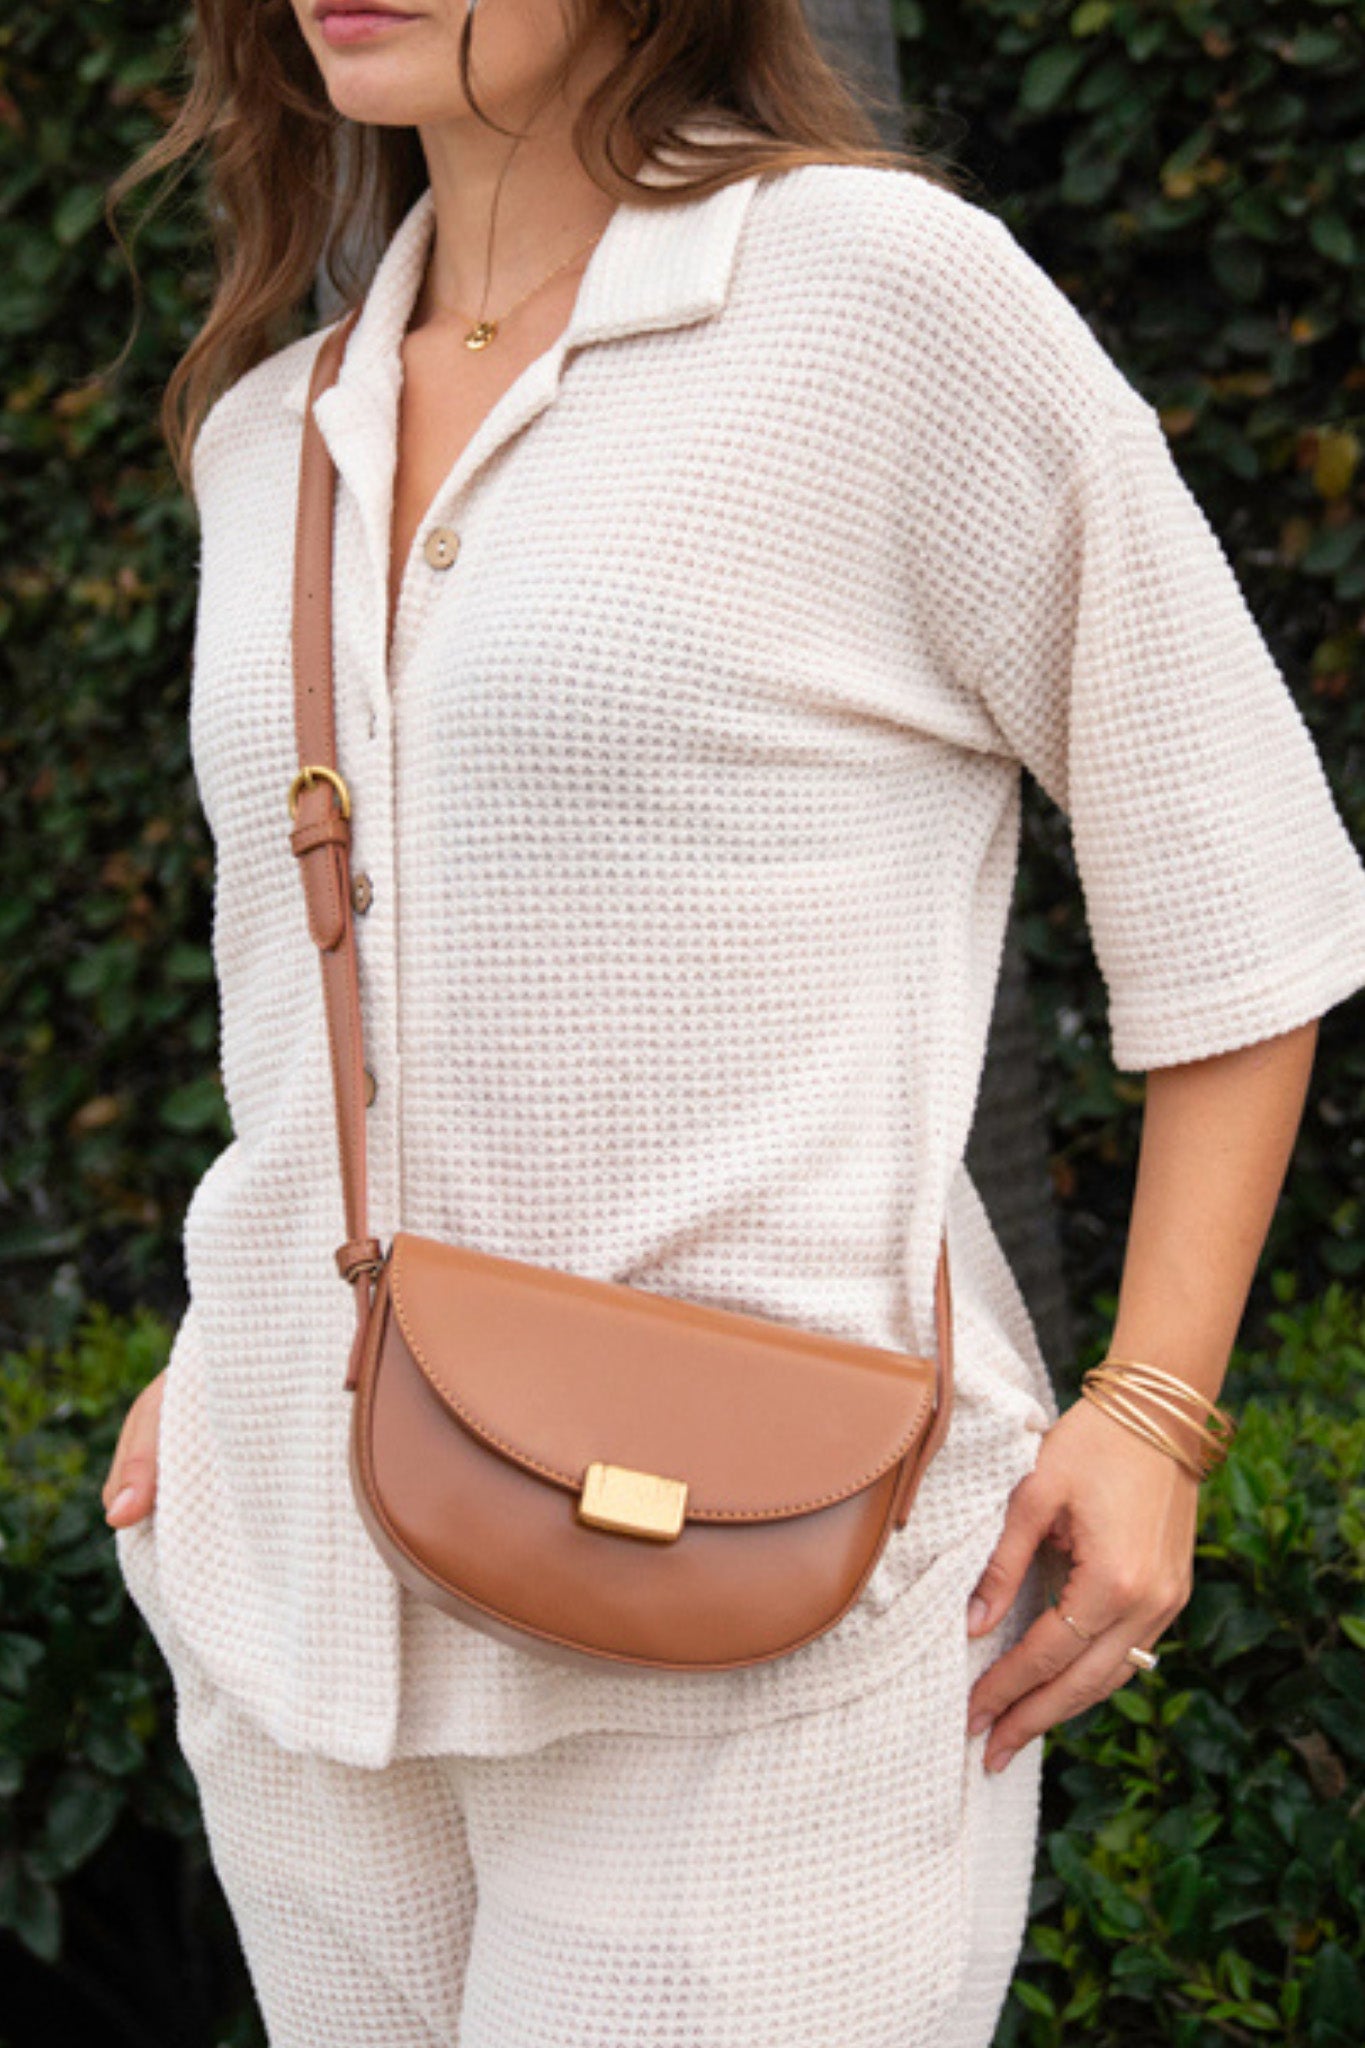 Rounded Crossbody Bag in Tan